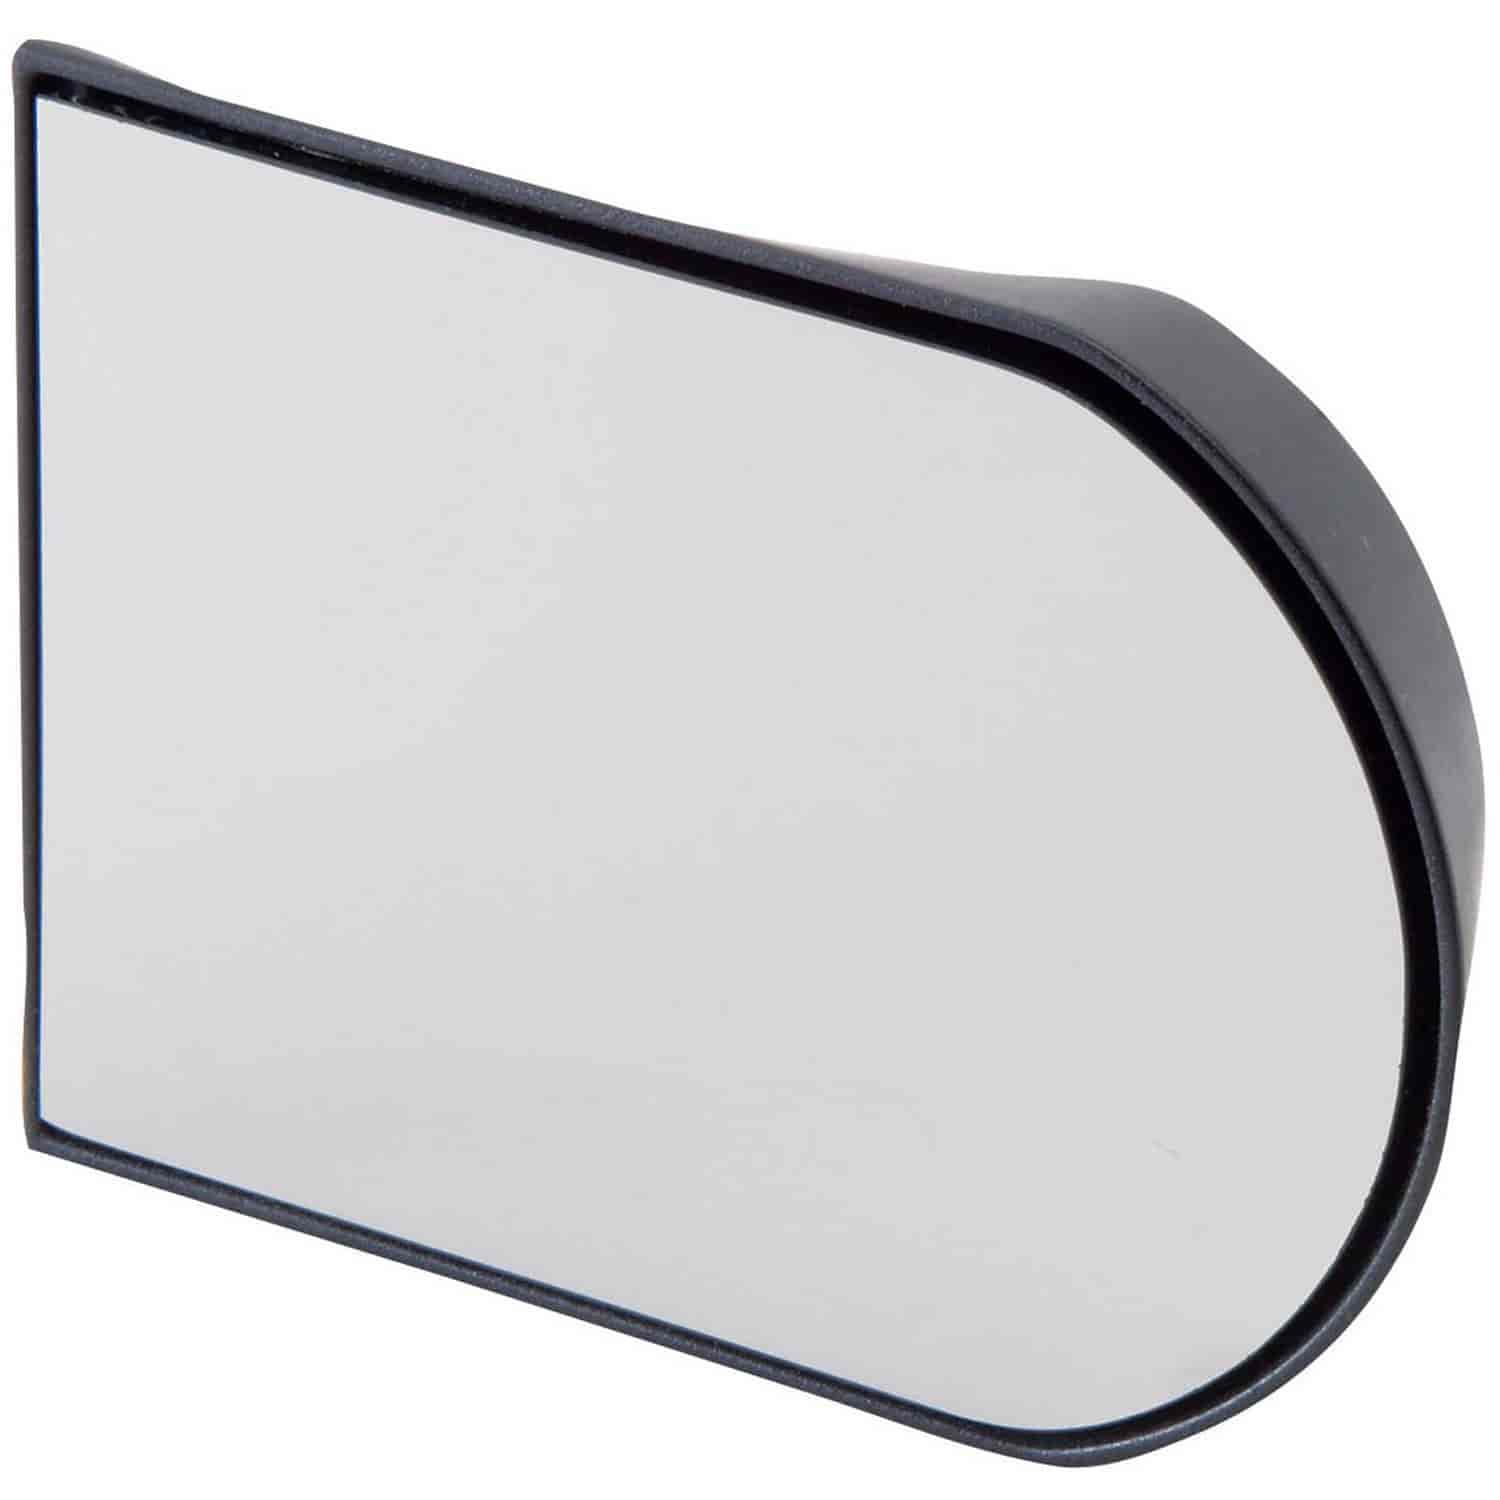 Super View Blind Spot Mirror 3 x 4 Easy Stick-on Installation Convex Lens increases visibility Inclu